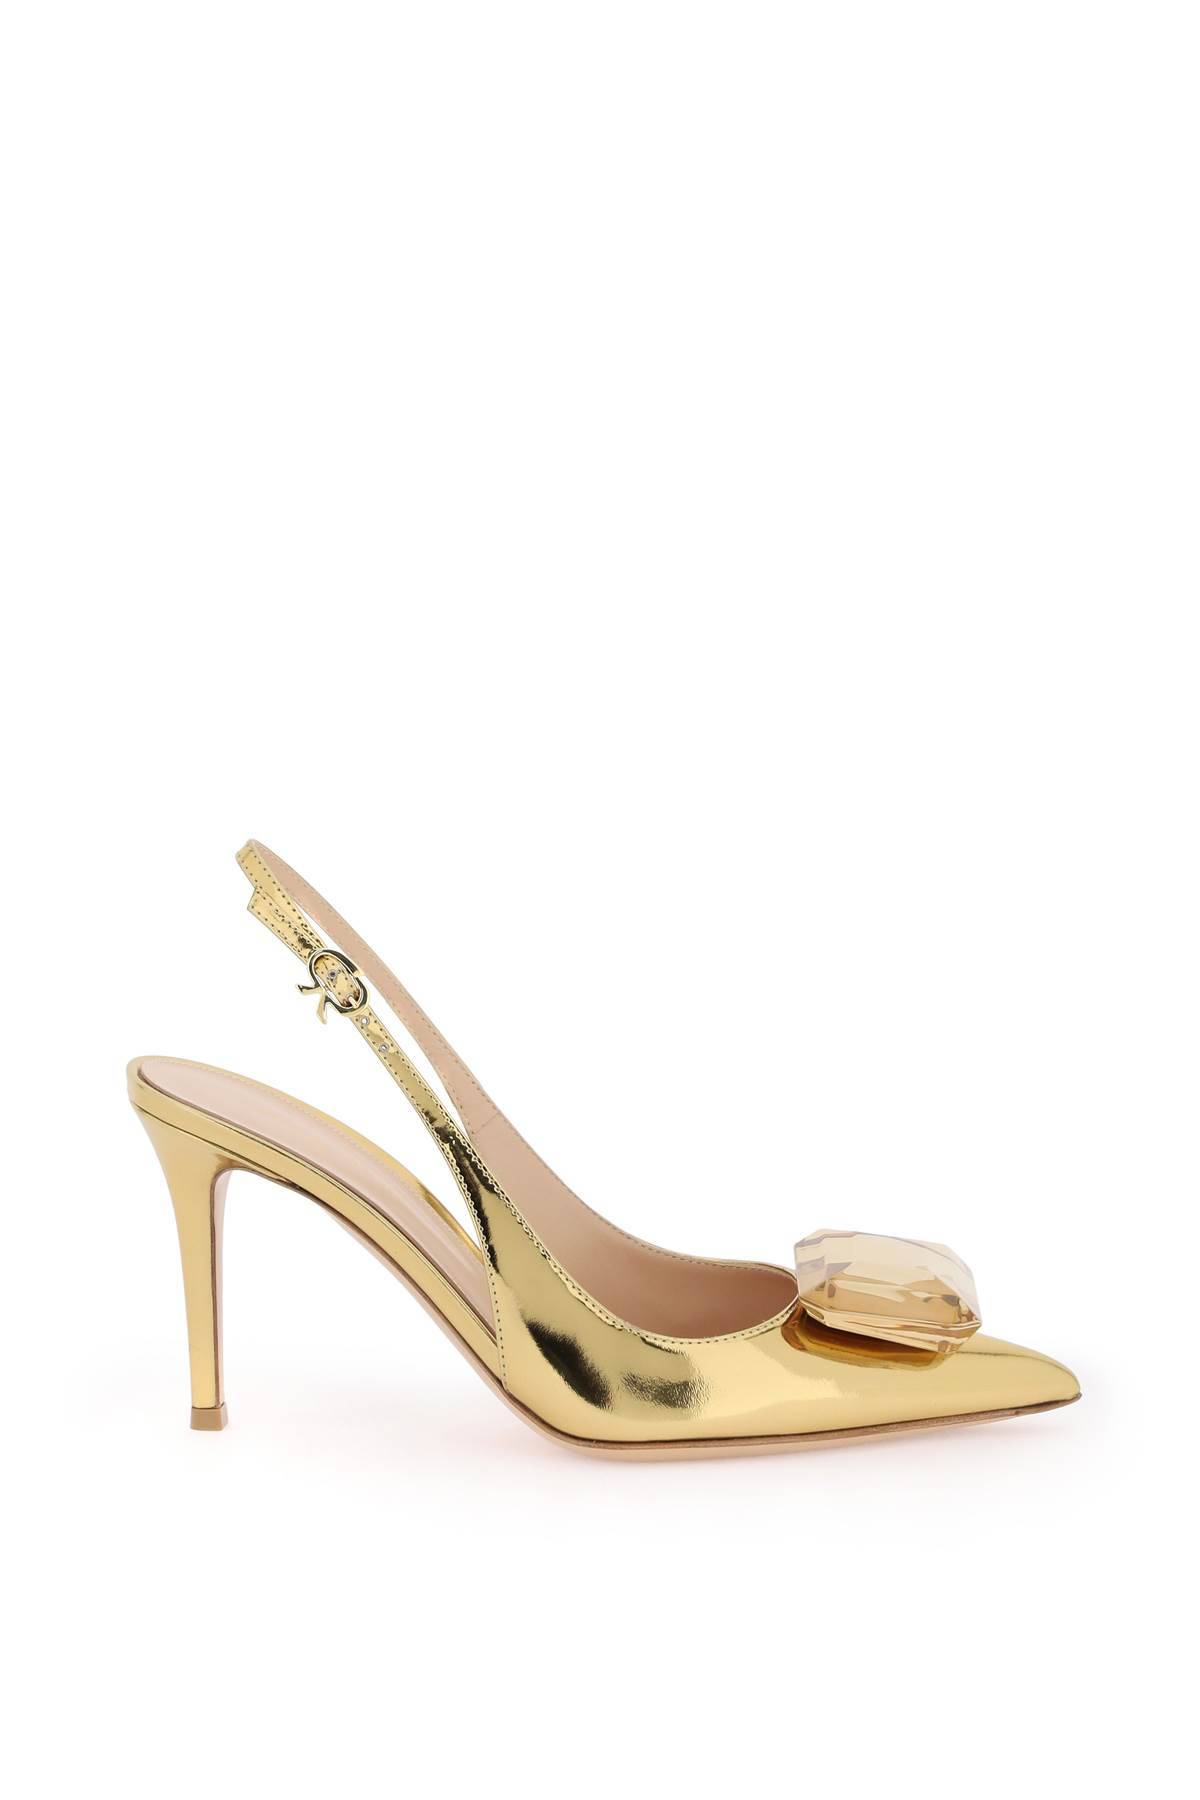 Shop Gianvito Rossi Jaipur Slingback Pumps In Gold